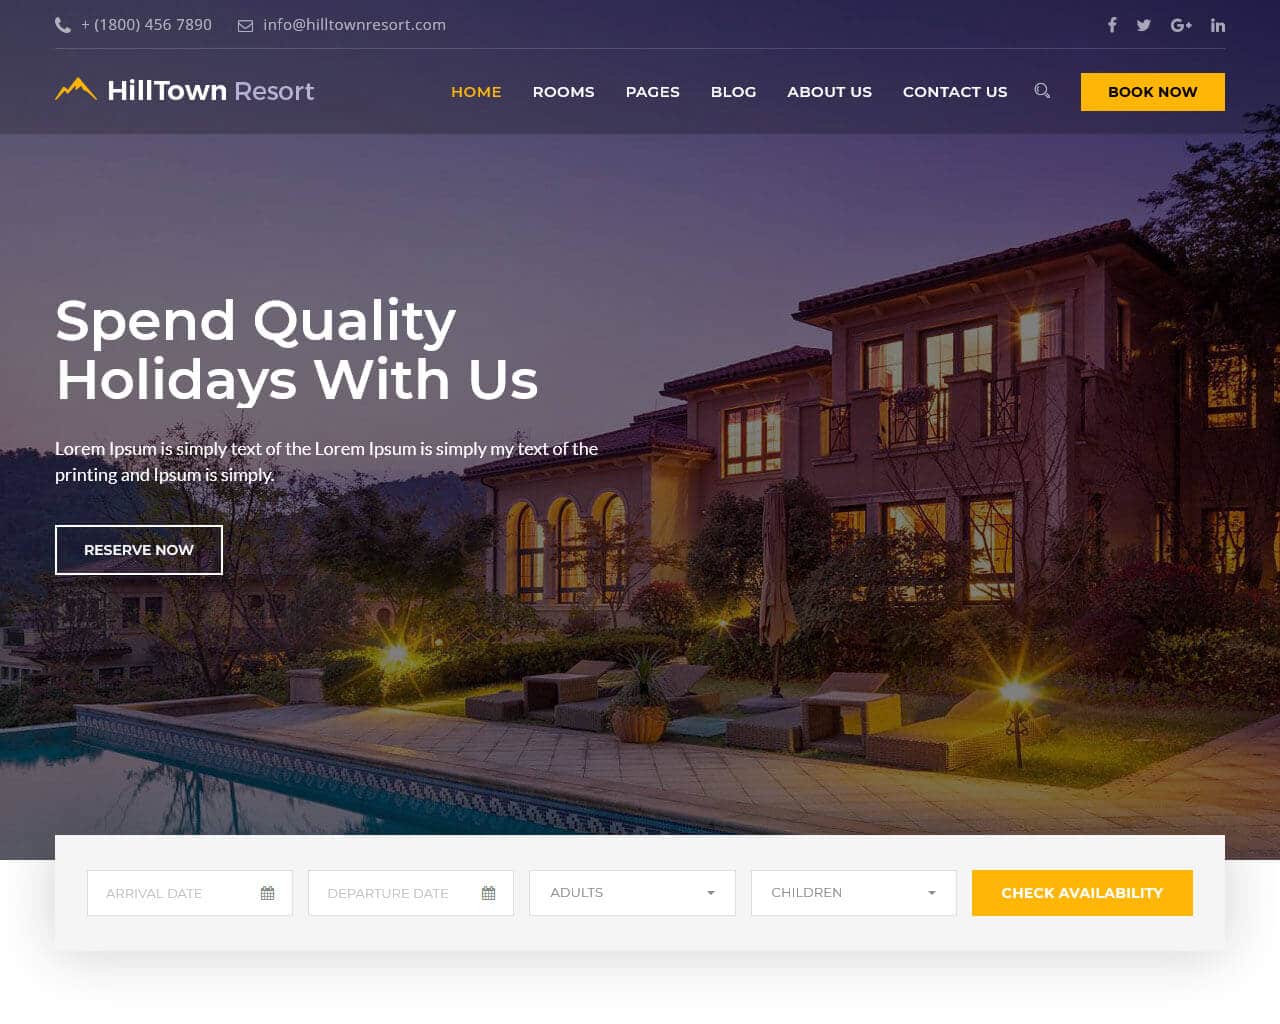 20 Hotel Website Templates to Build the Best Booking Website 2019